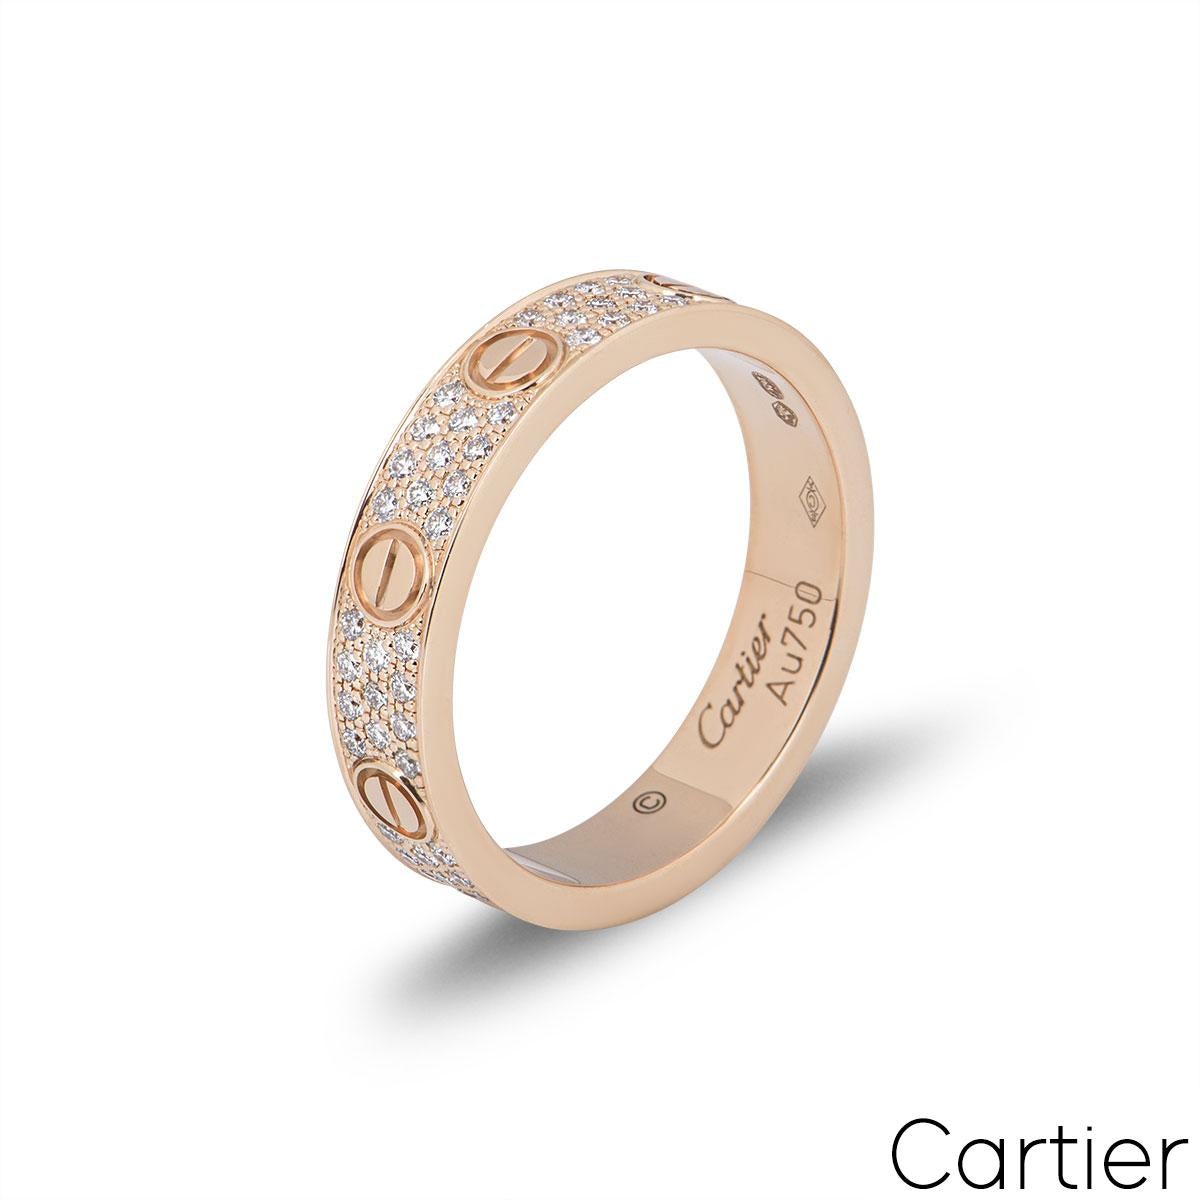 An 18k rose gold Cartier diamond pave ring from the Love collection. The ring comprises of the iconic screw motifs displayed around the outer edges with 88 round brilliant cut diamonds totalling 0.31ct set between each screw motif. The ring measures